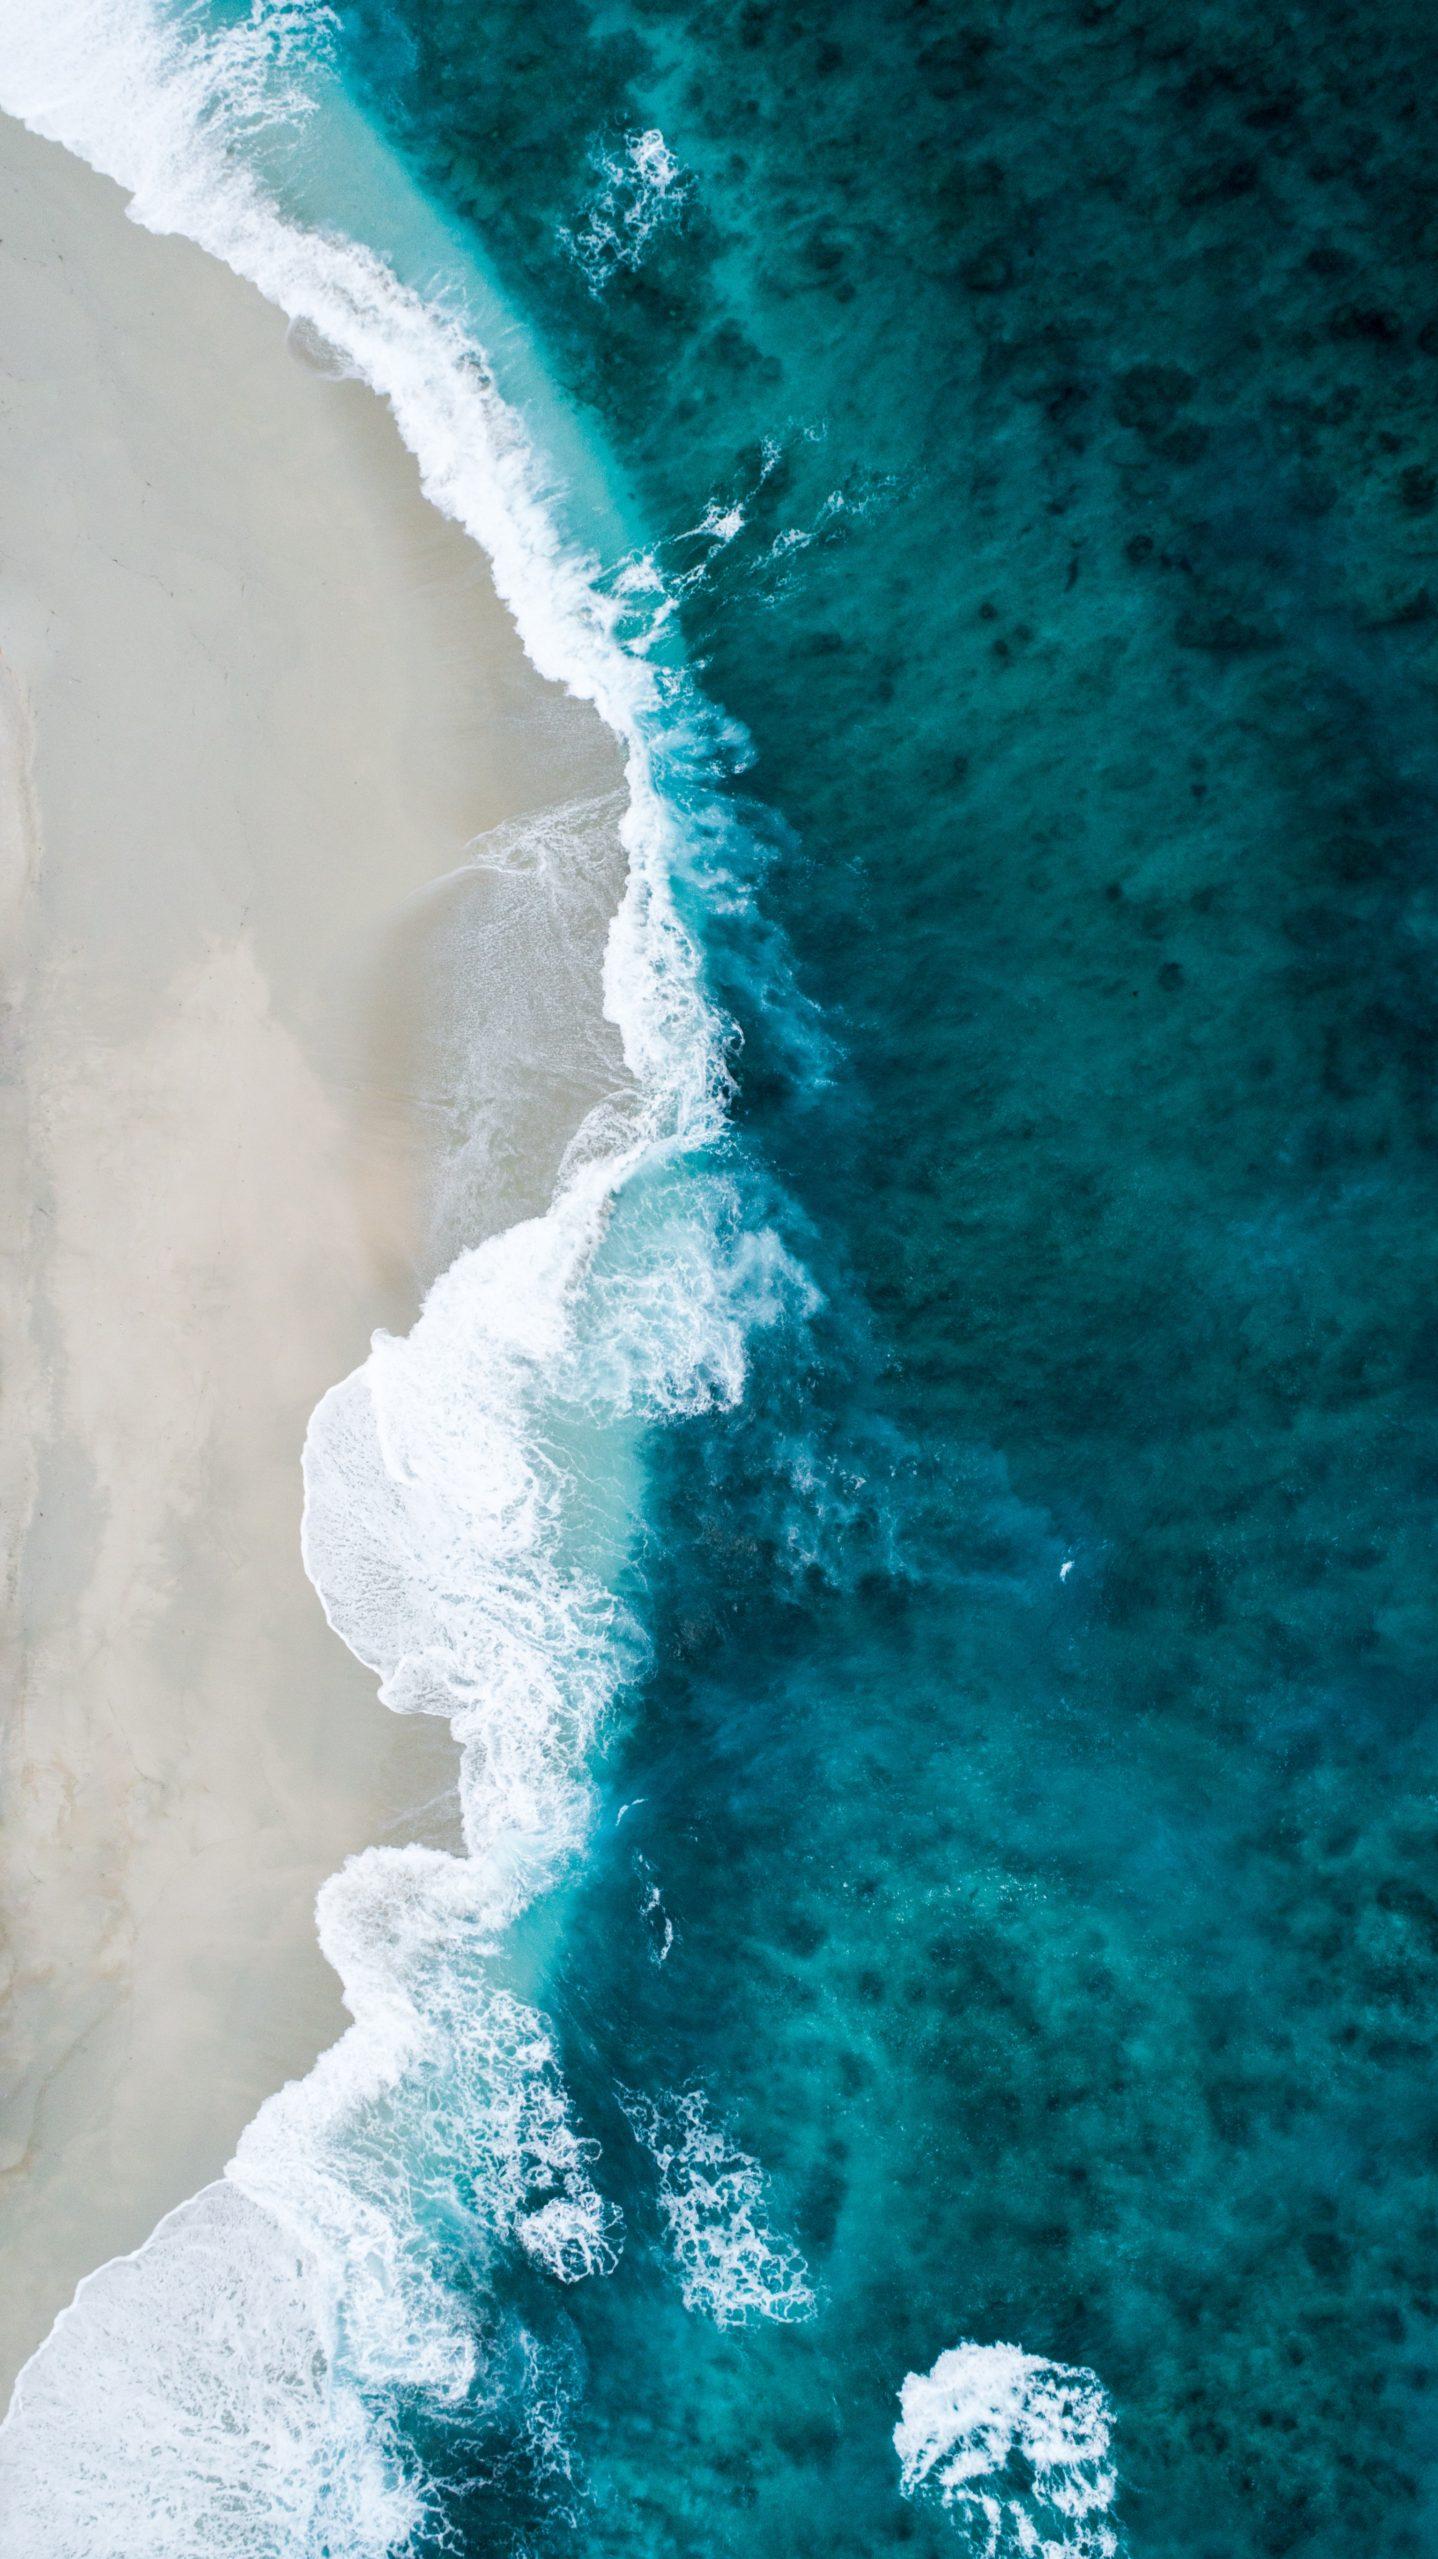 The Most Beautiful Ocean Wallpaper Background For iPhone Glory